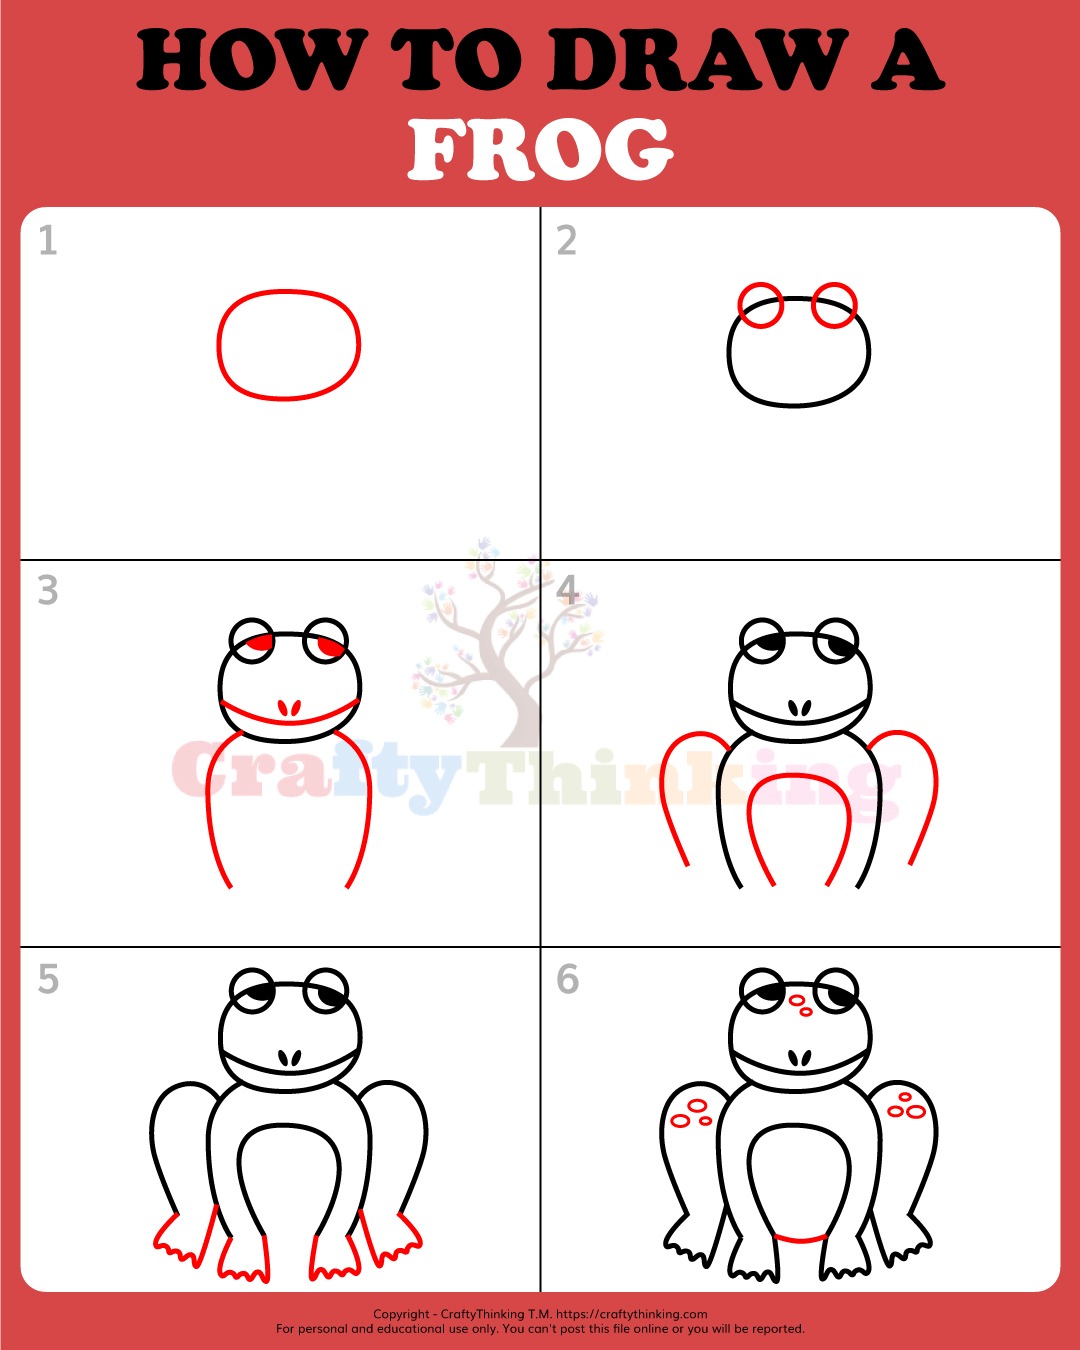 How To Draw A Frog (Step by Step) - CraftyThinking